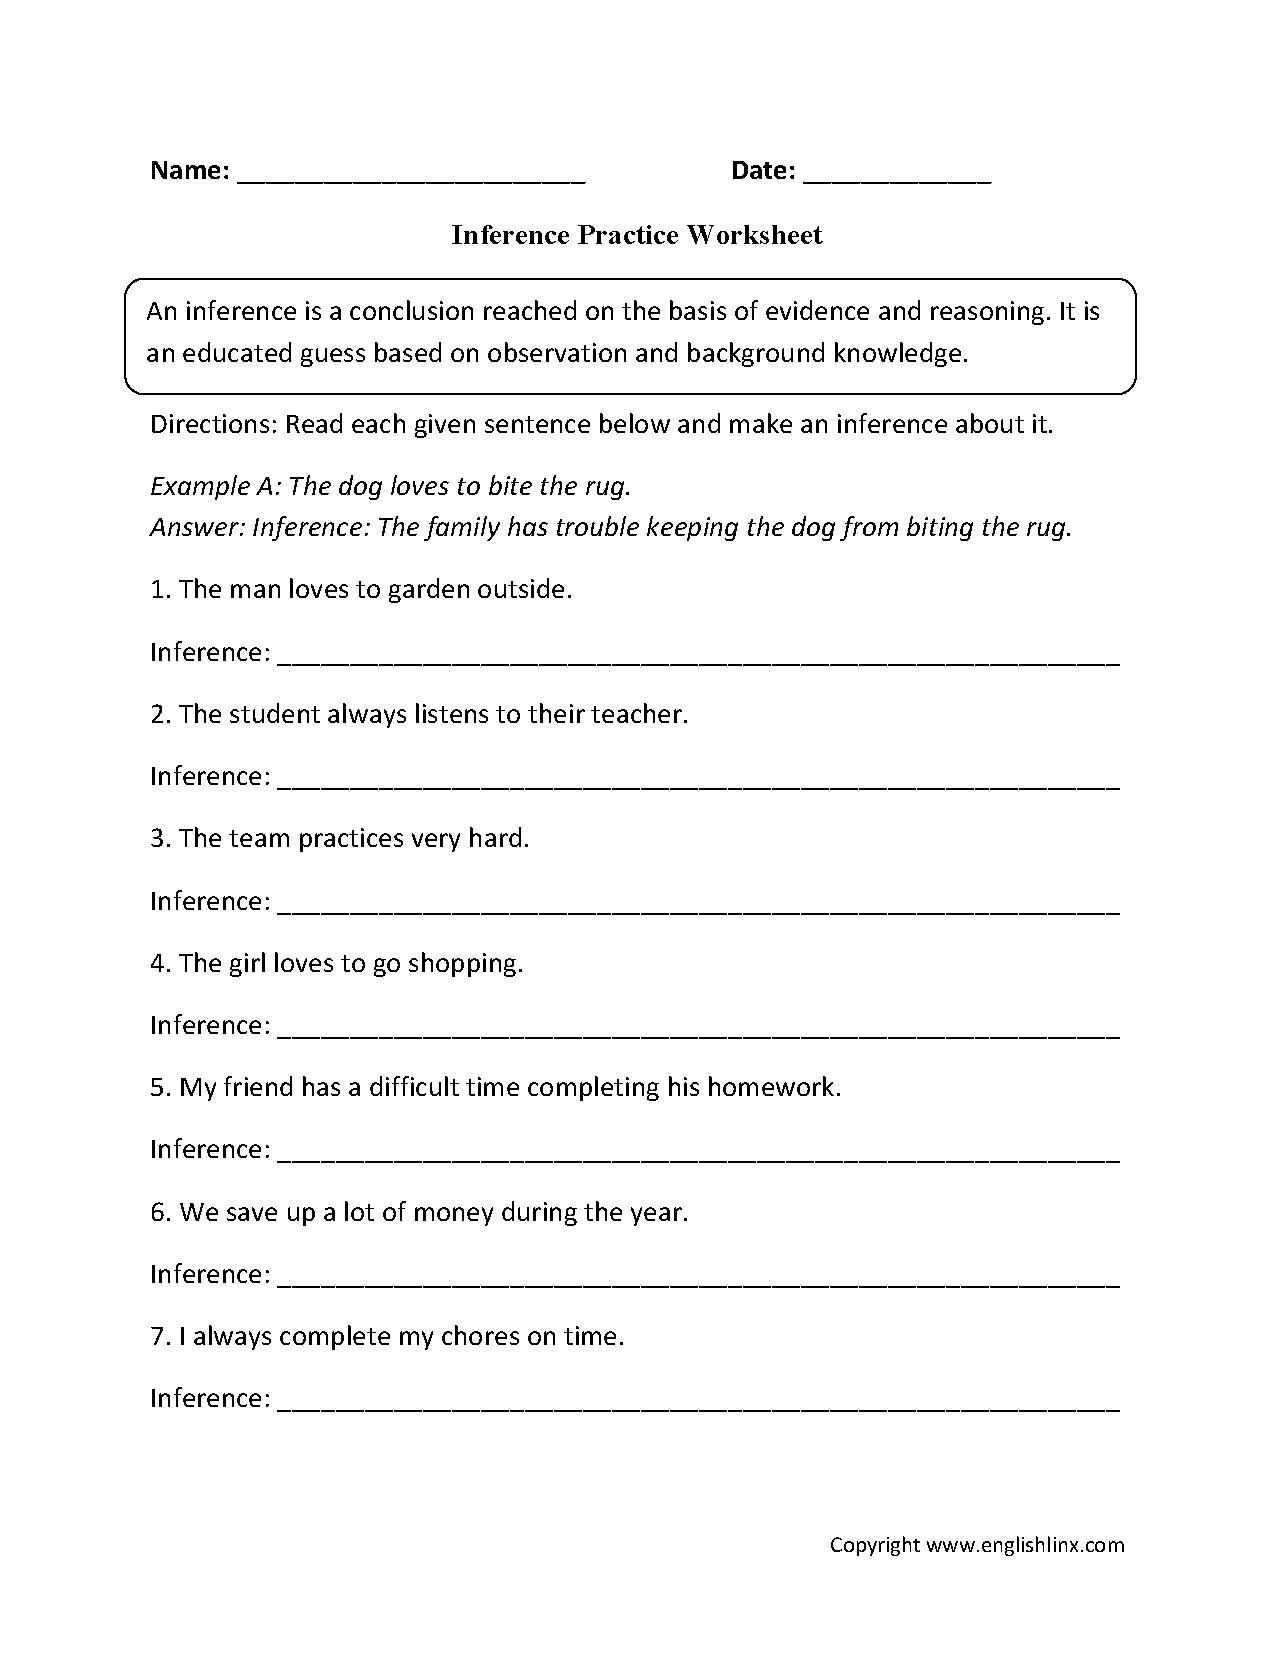 context-clues-worksheets-5th-grade-to-free-download-math-db-excel